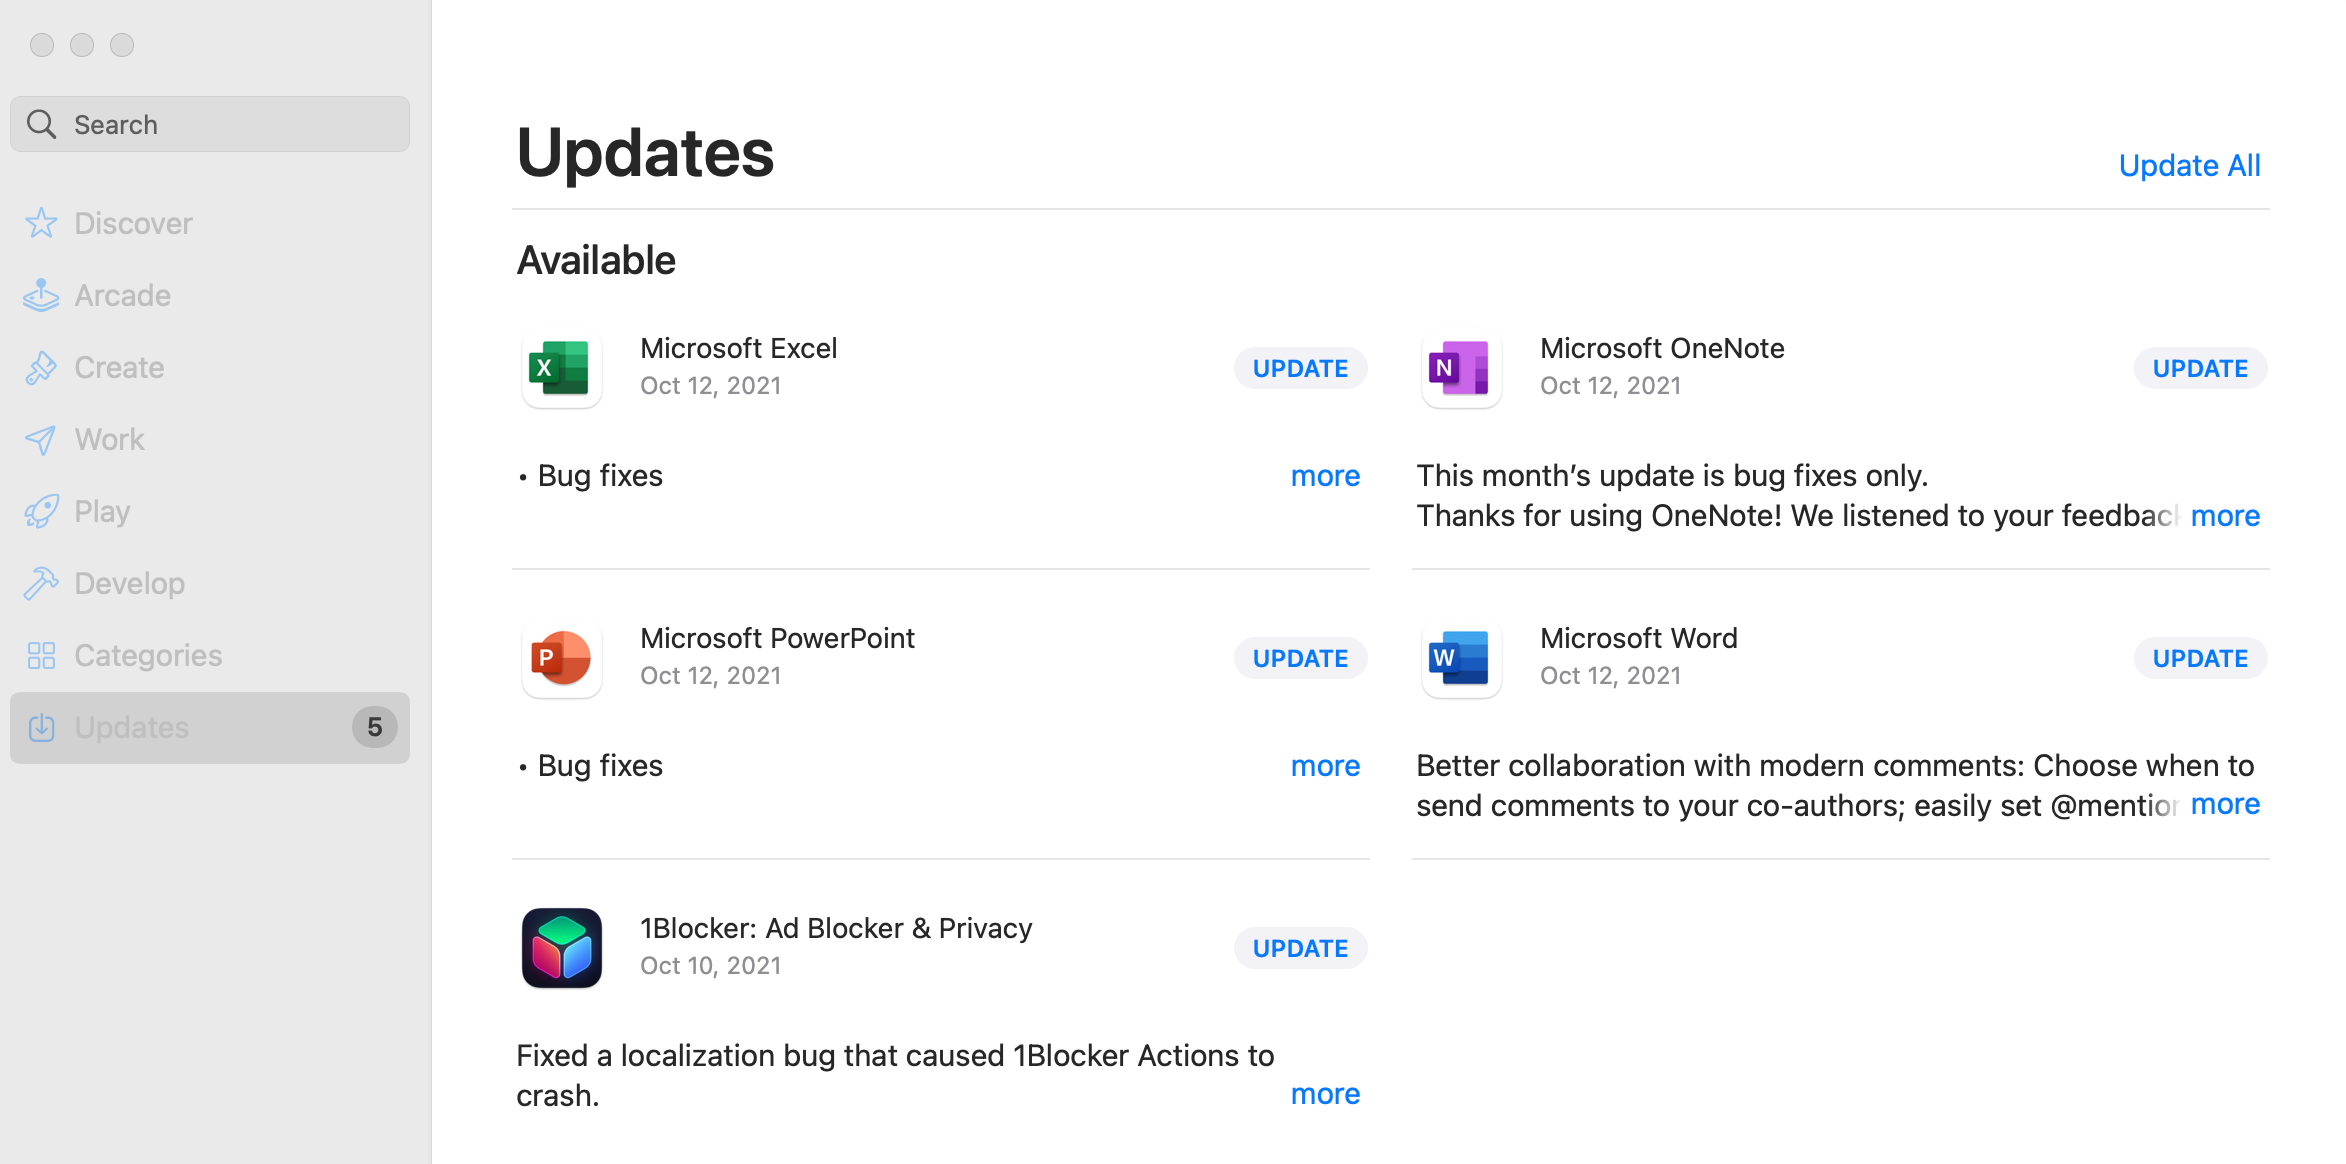 Updates page in Mac App Store